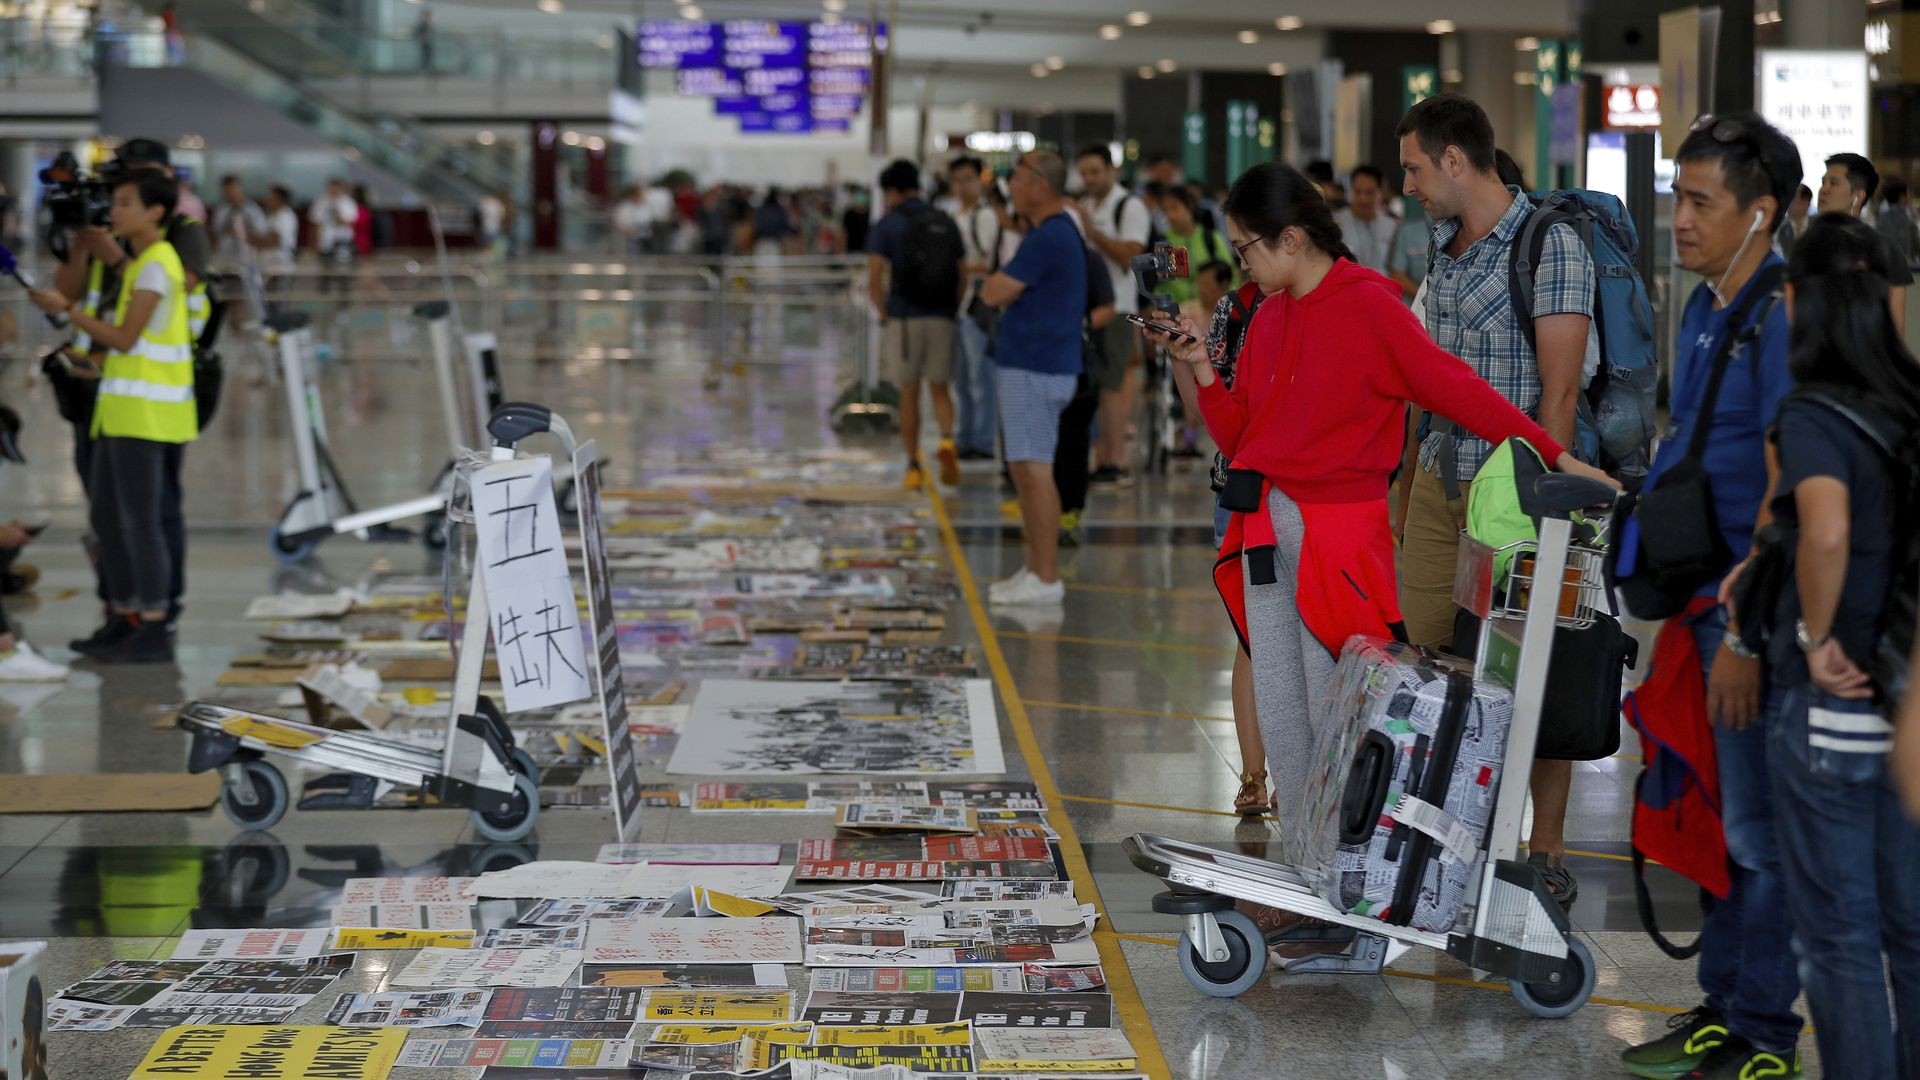 Travellers look at placards and posters placed by protesters at the airport in Hong Kong